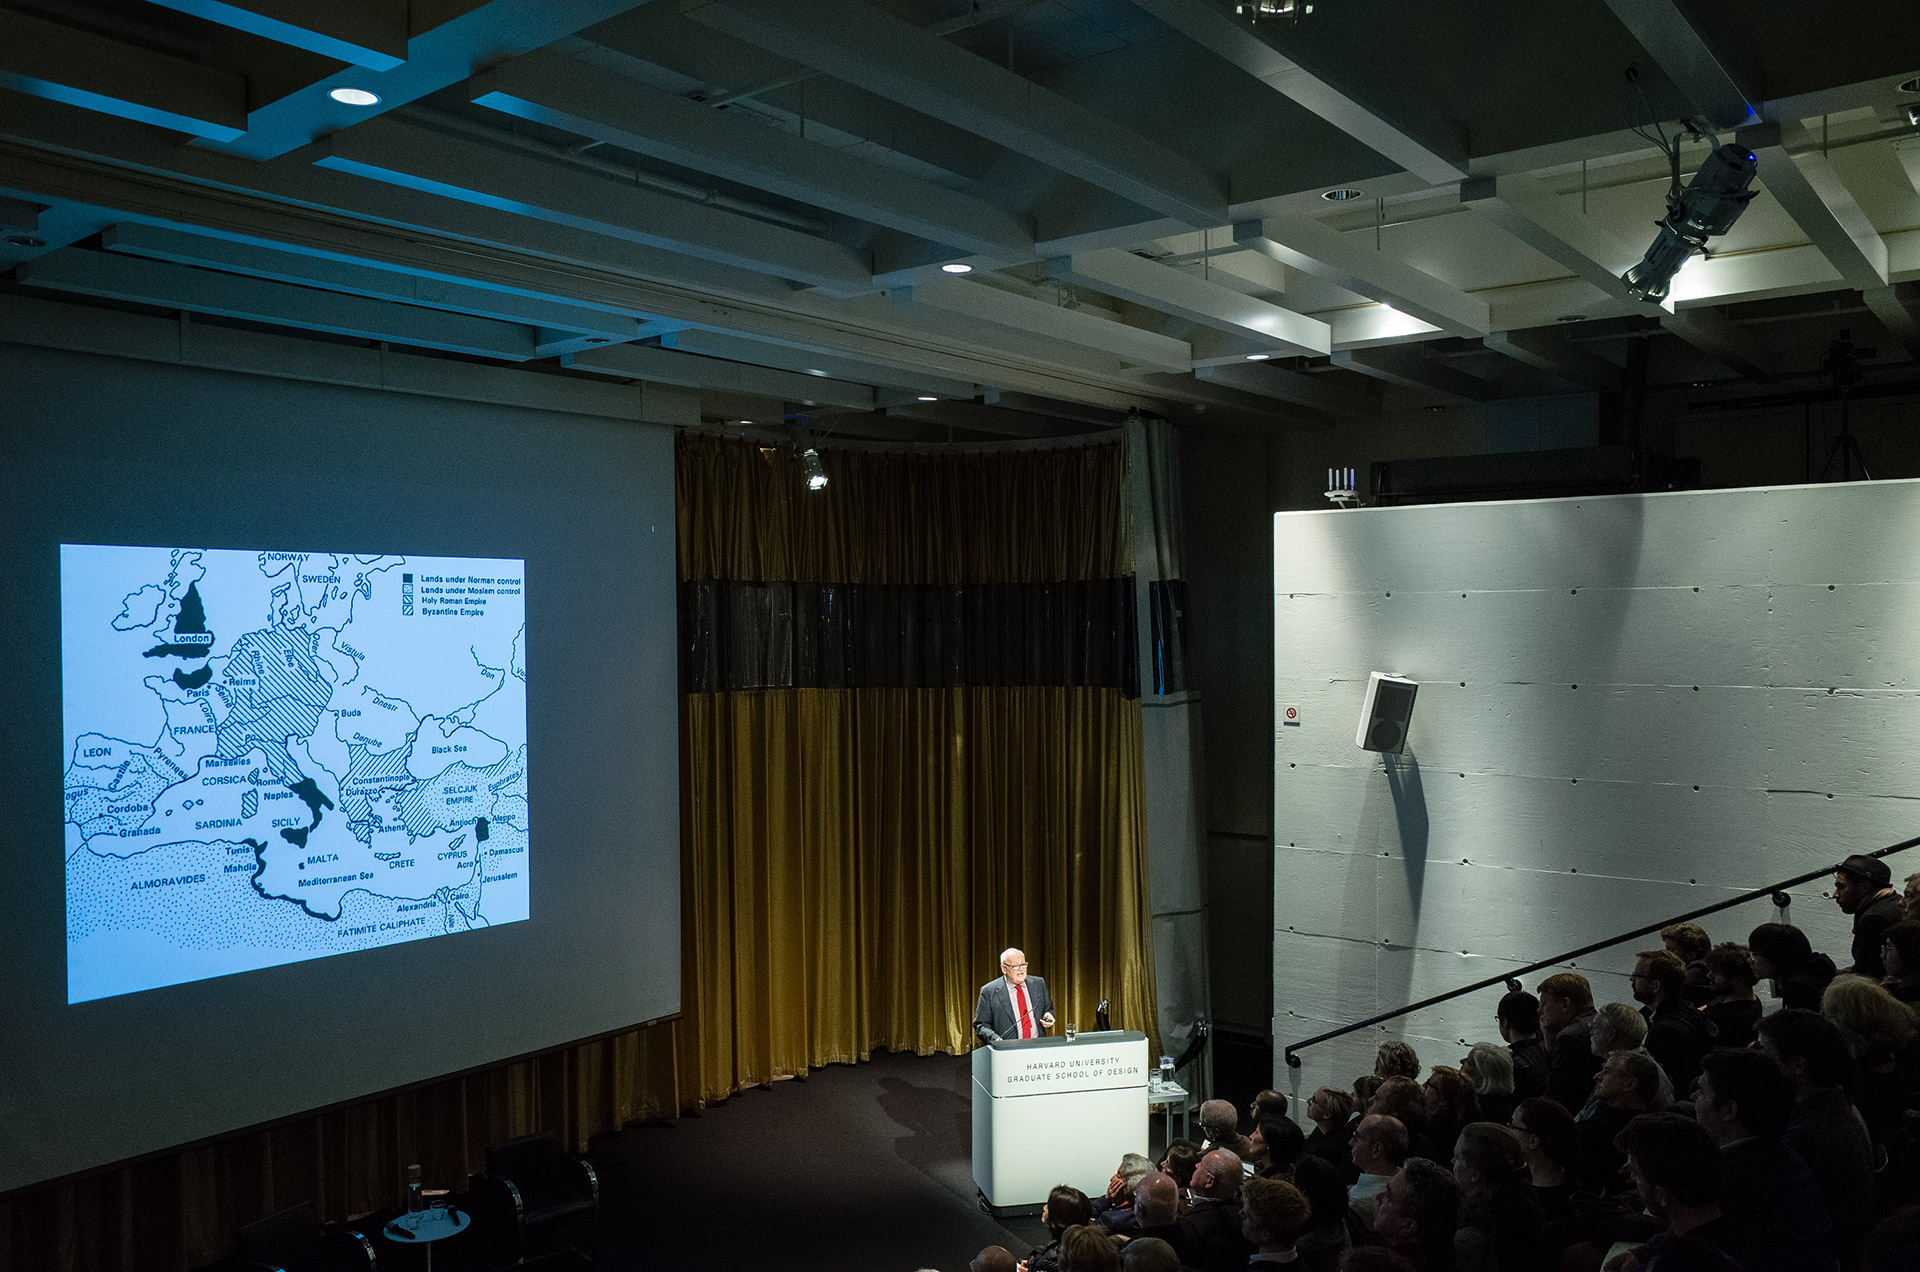 Eduard Sekler Memorial Lecture: Jorge Silvetti, “TYPE: Architecture’s elusive obsession and the rituals of an impasse” 6